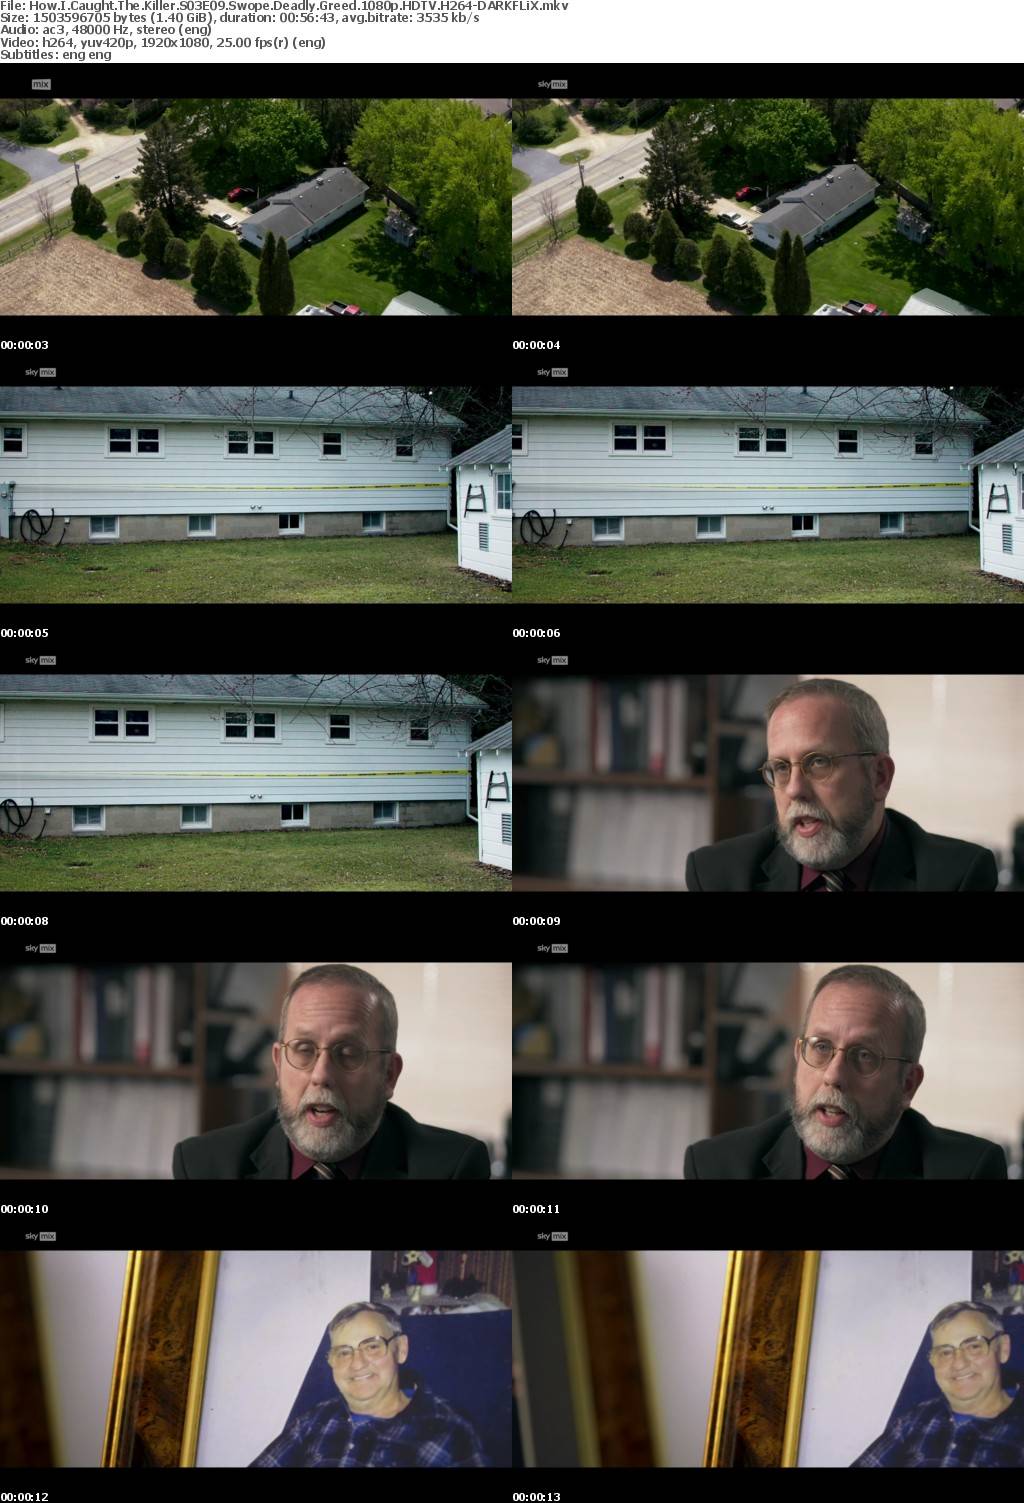 How I Caught The Killer S03E09 Swope Deadly Greed 1080p HDTV H264-DARKFLiX